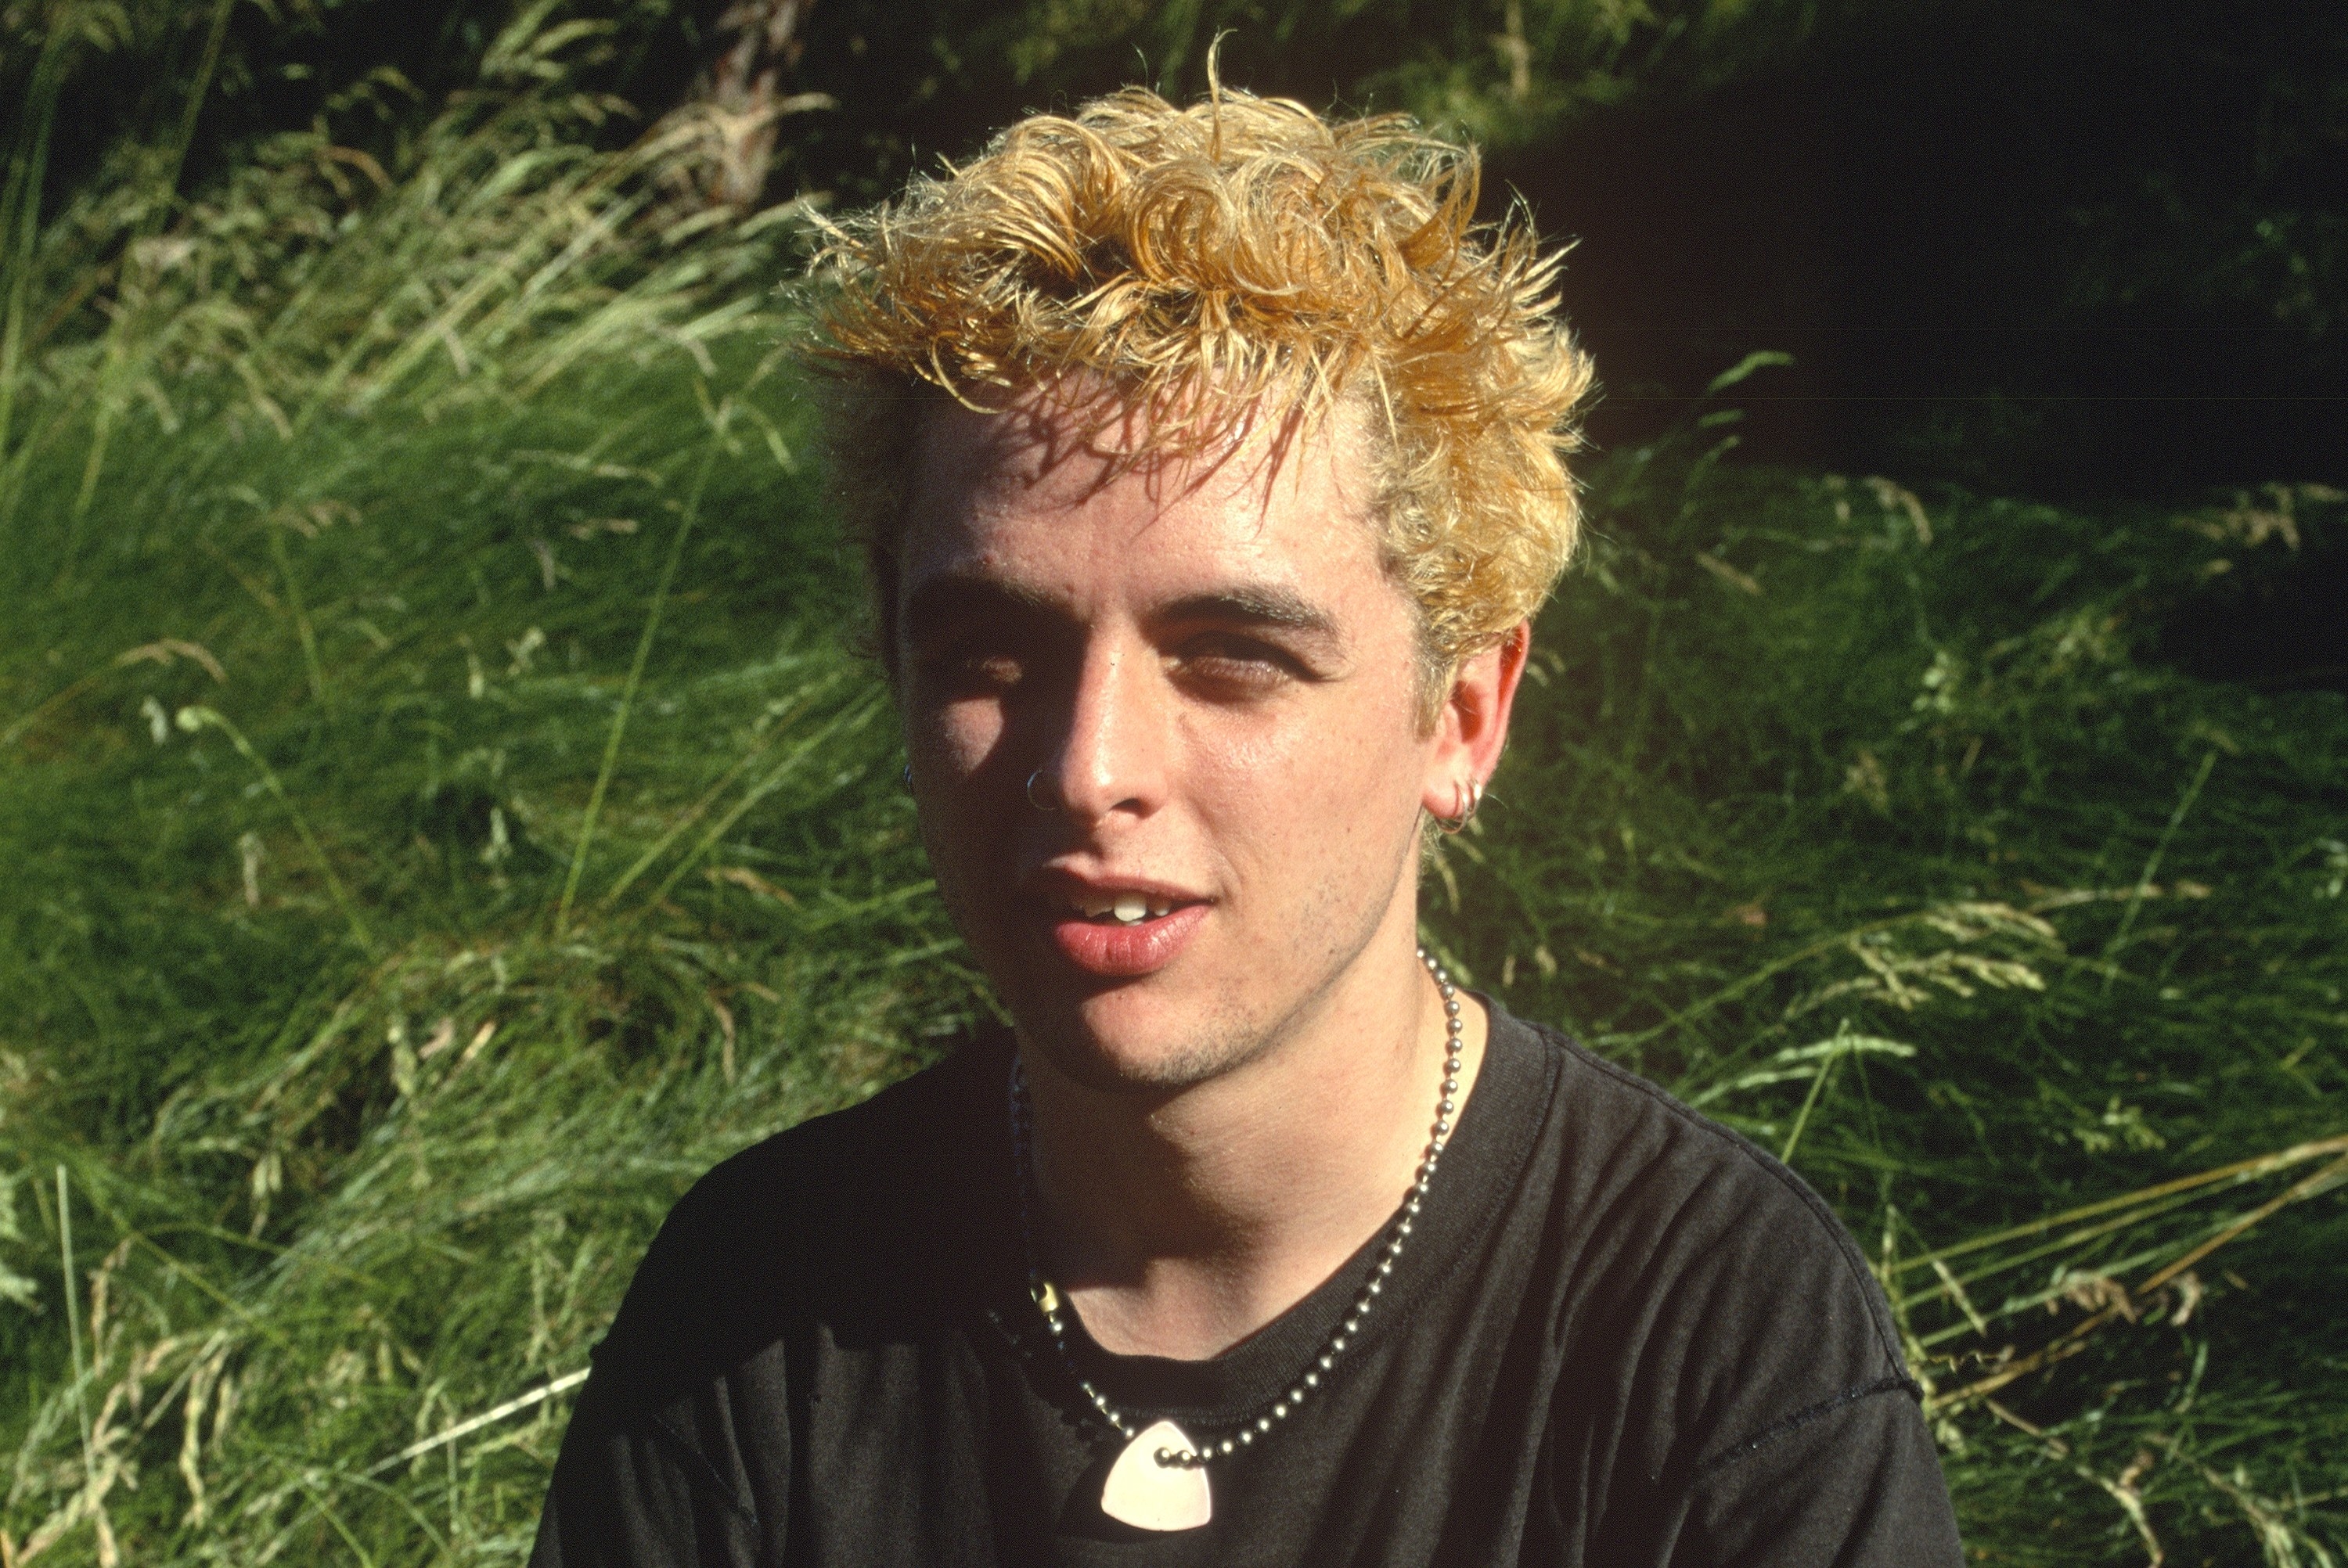 Billy Joe Armstrong of Green Day in 1994